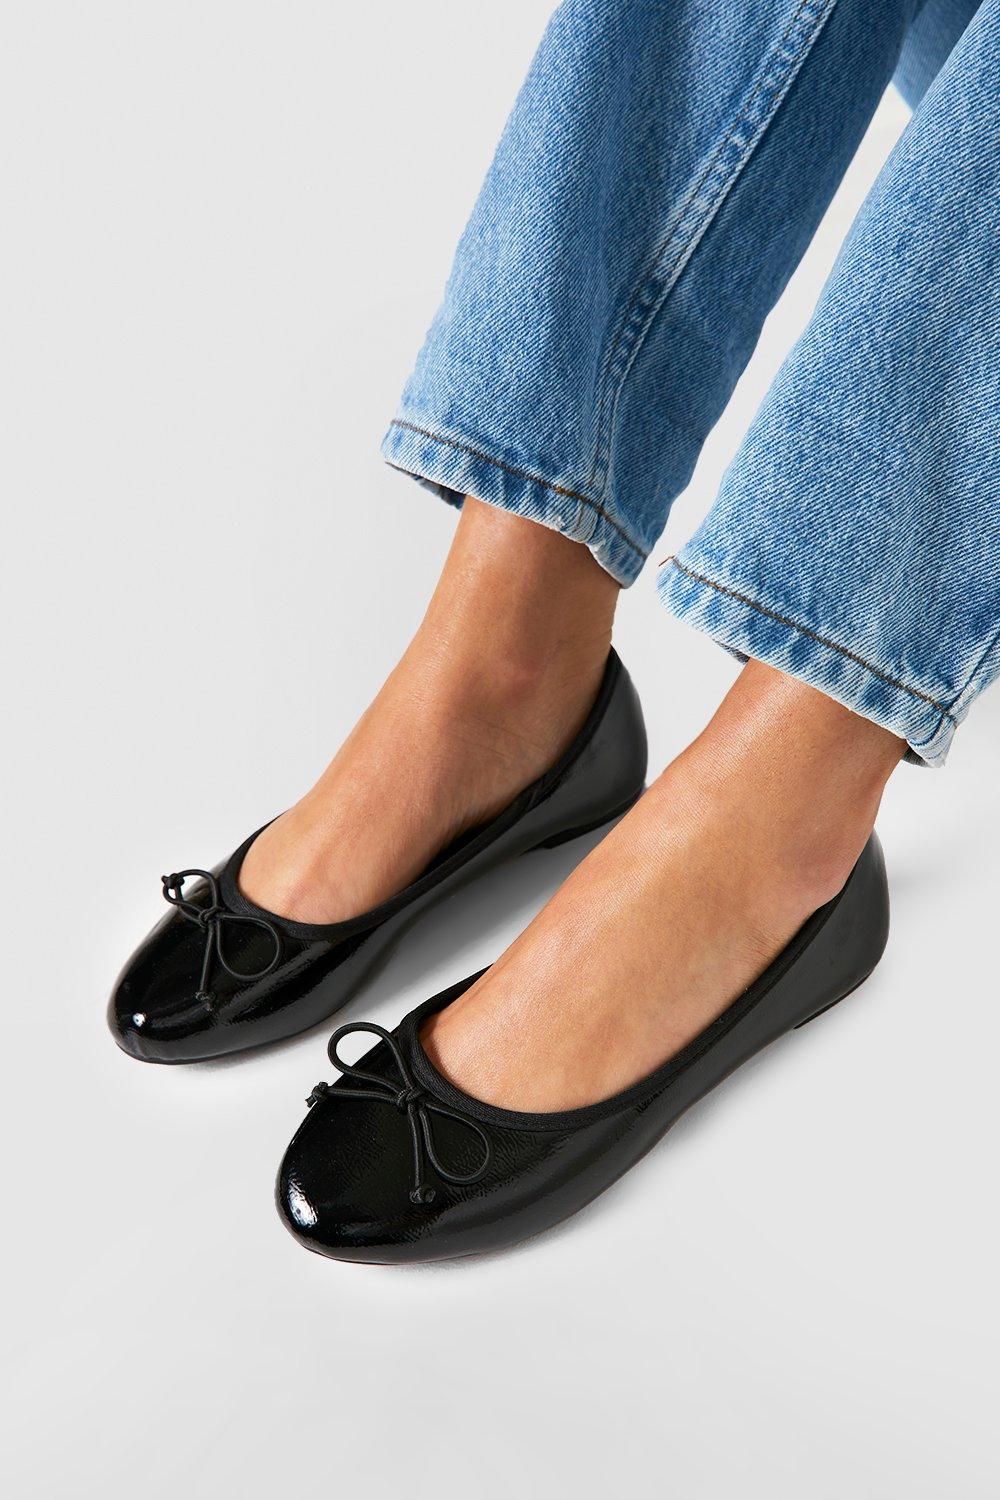 Flats | Wide Fit Patent Basic Bow Detail Ballet Flats | boohoo